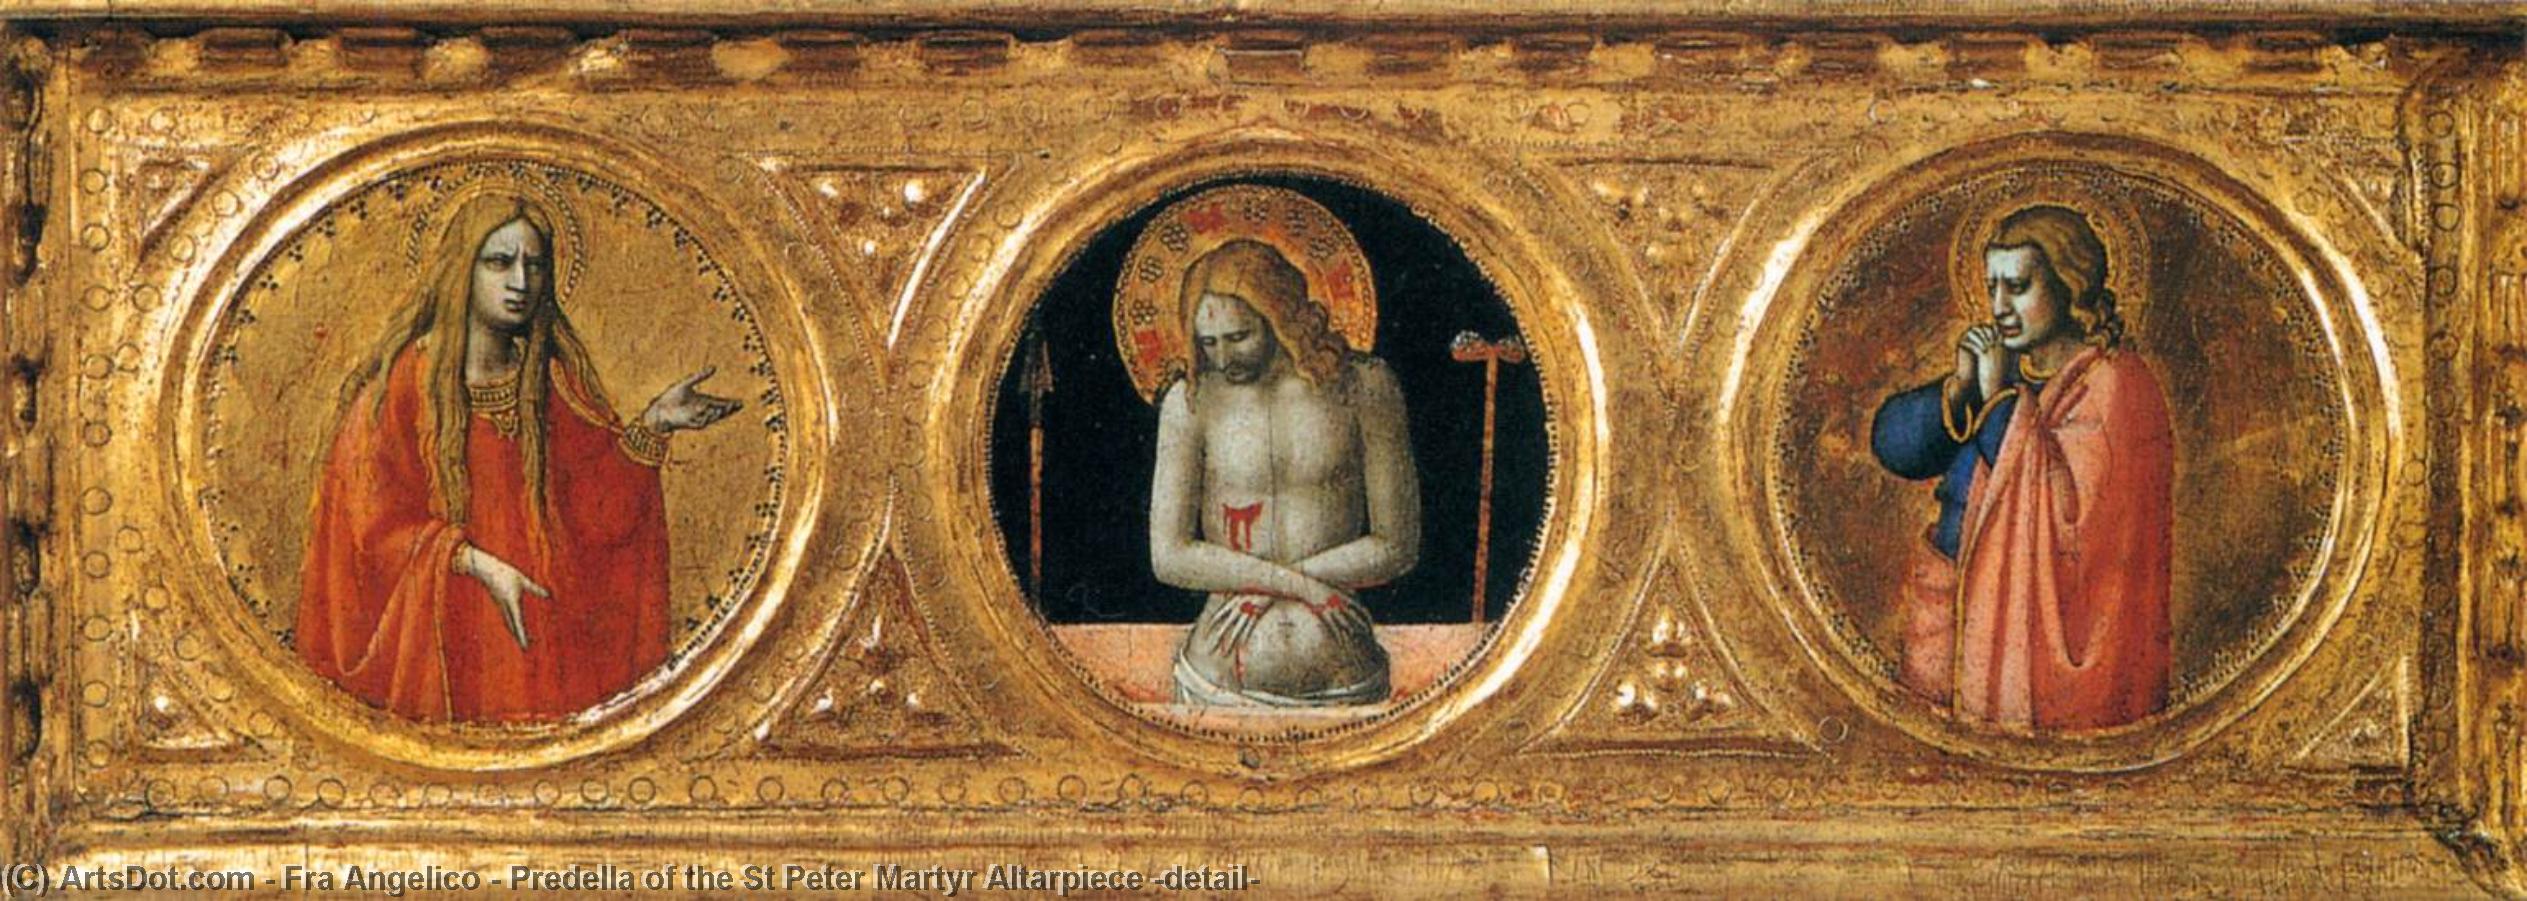 Order Artwork Replica Predella of the St Peter Martyr Altarpiece (detail), 1427 by Fra Angelico (1395-1455, Italy) | ArtsDot.com